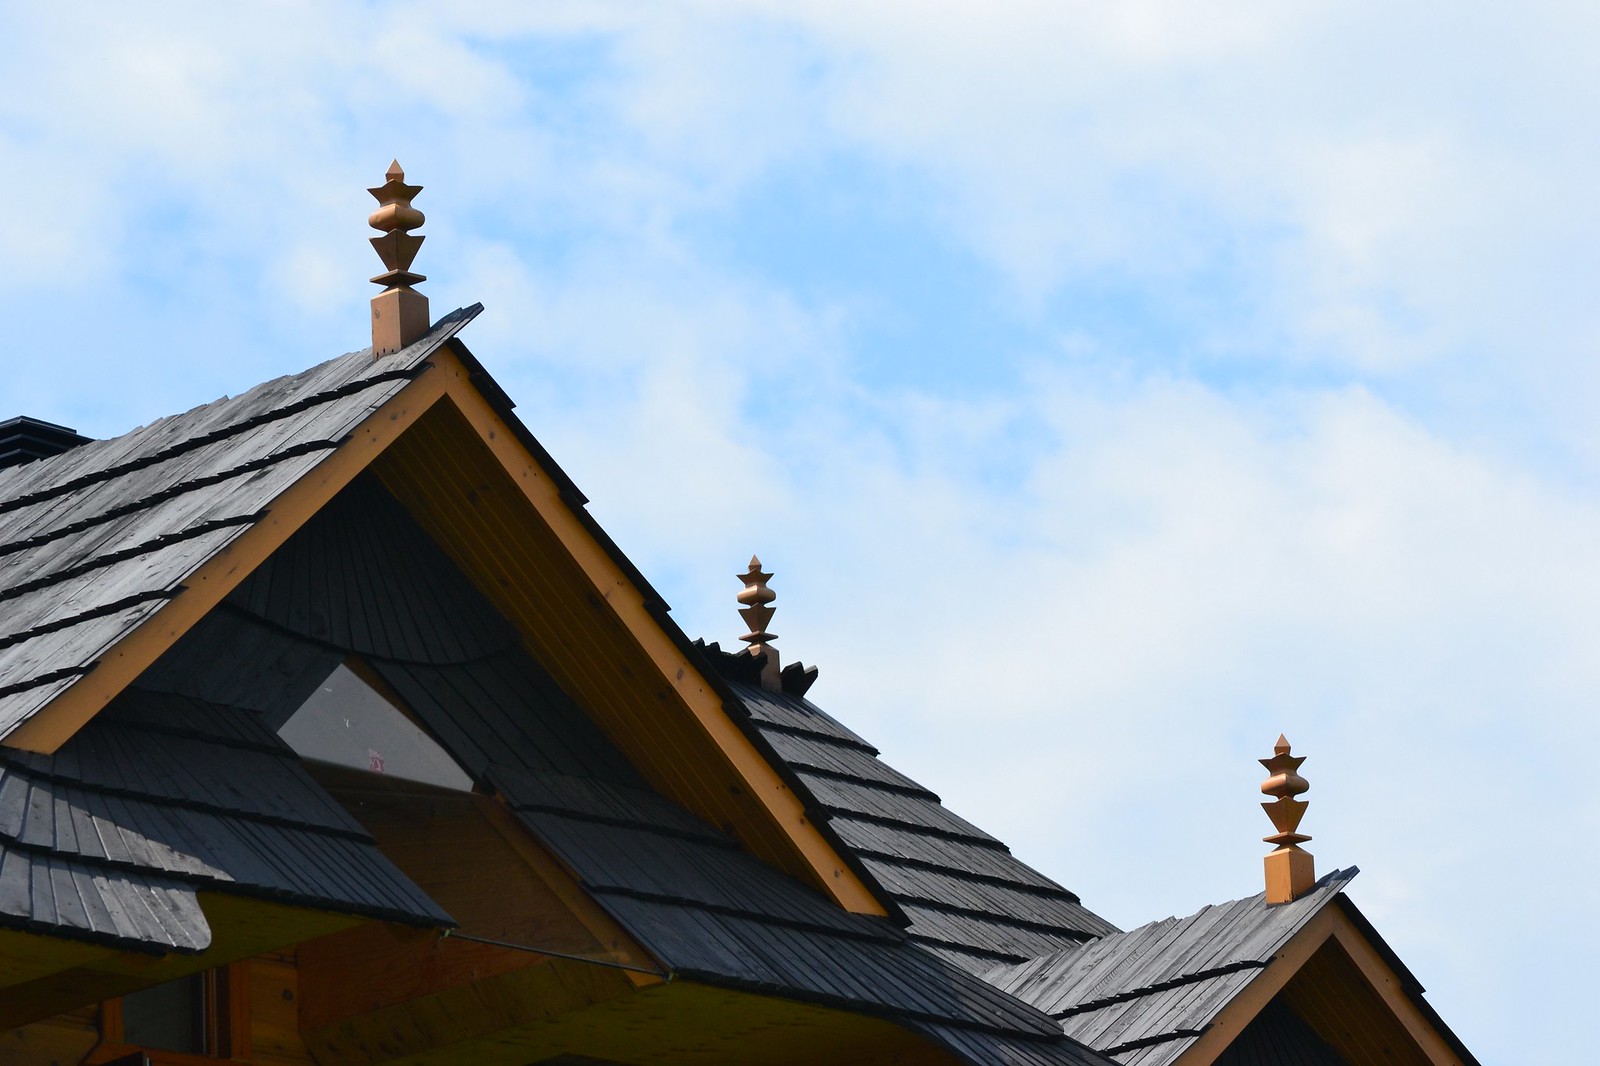 Details of the roof - Domaine Tomali-Maniatyn, B&B, Sutton, QC